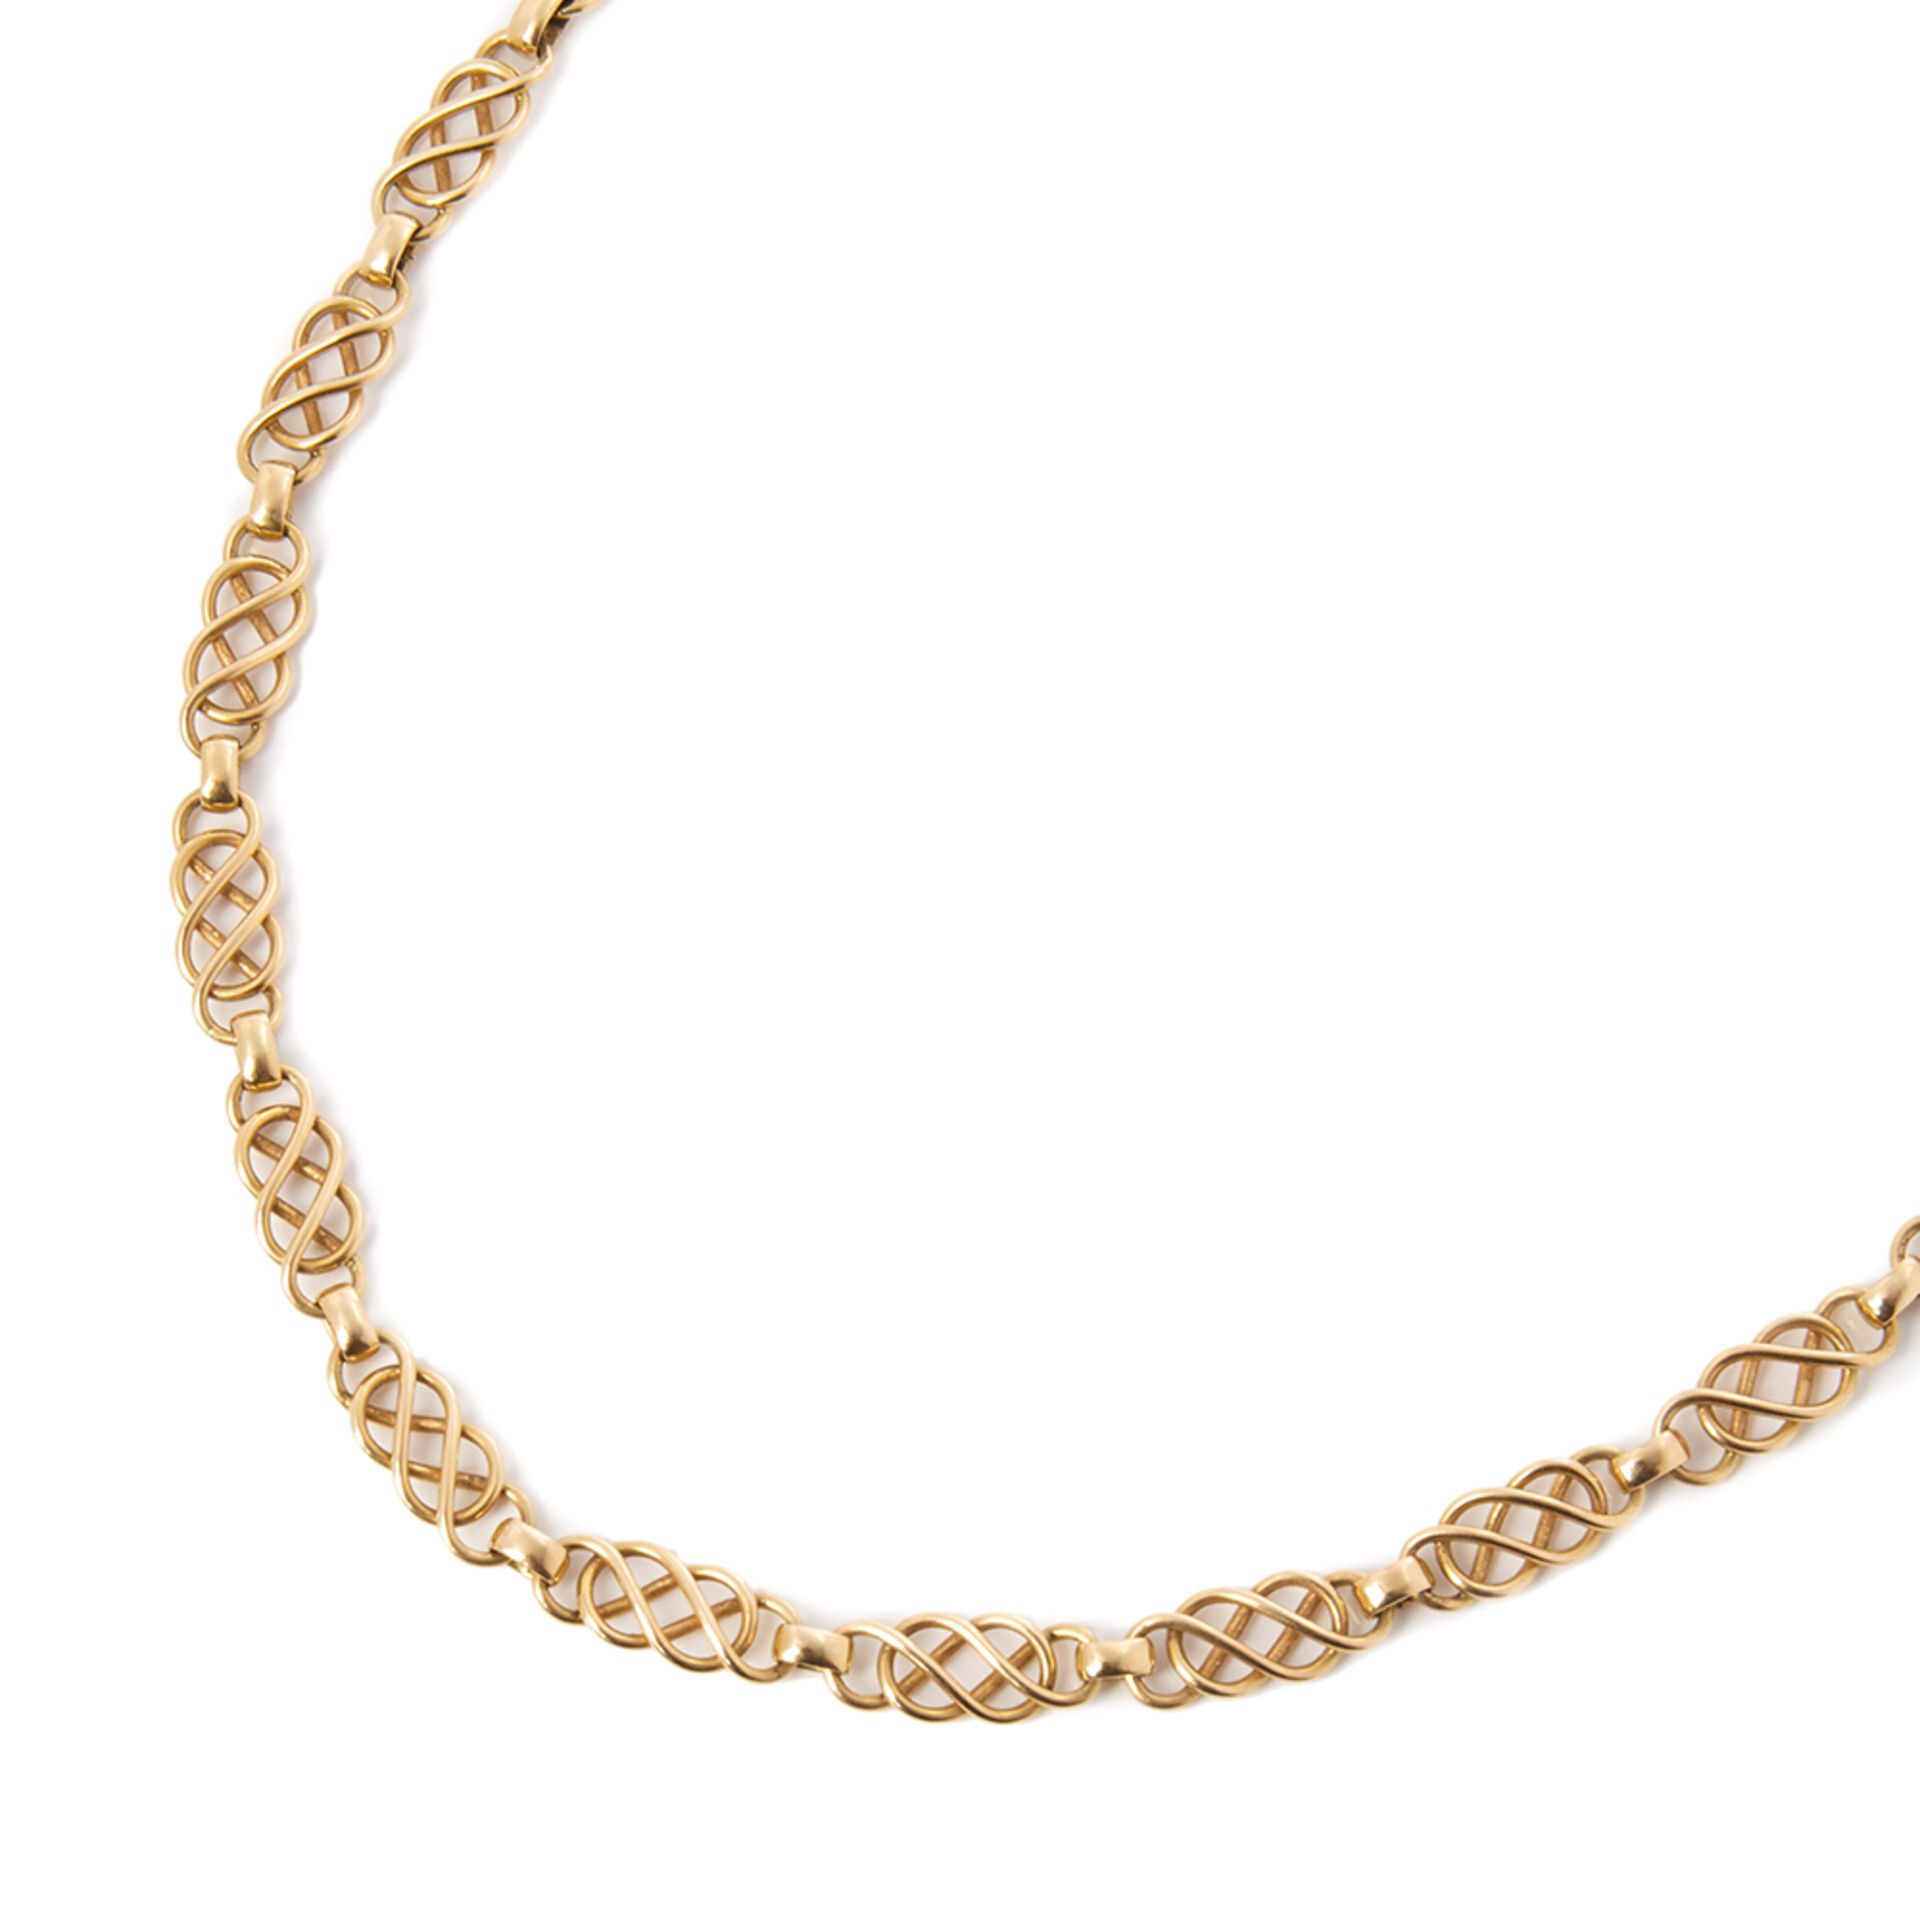 Georg Jensen 18k Yellow Gold Chain Vintage Necklace - Image 2 of 7